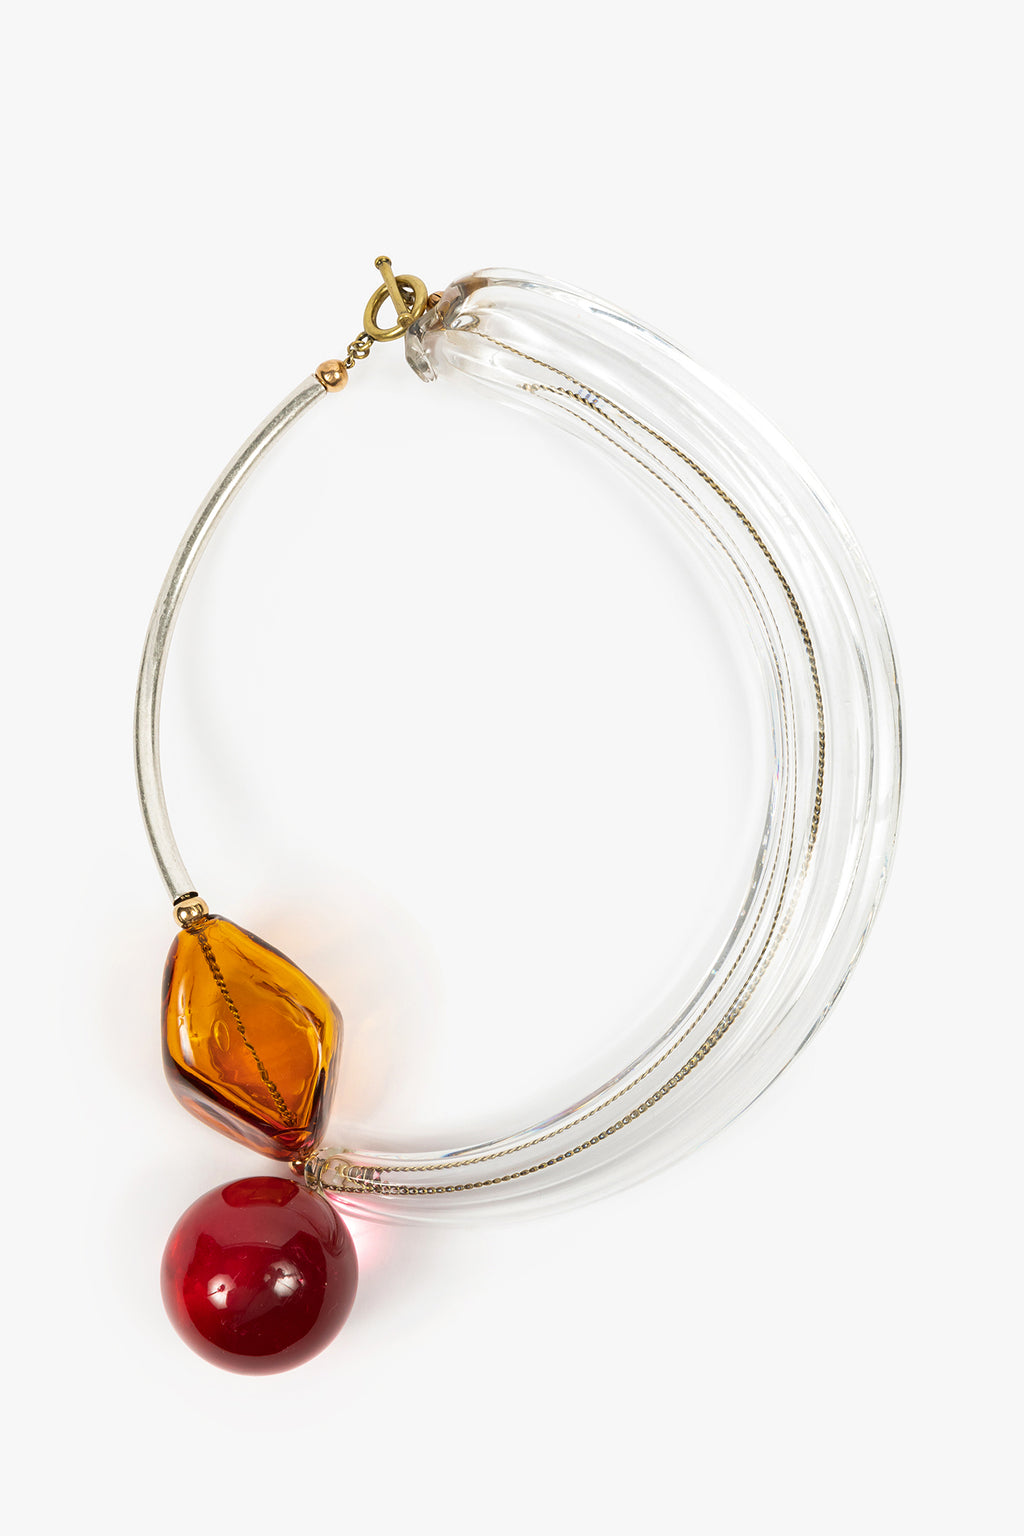 Hand blown glass necklace